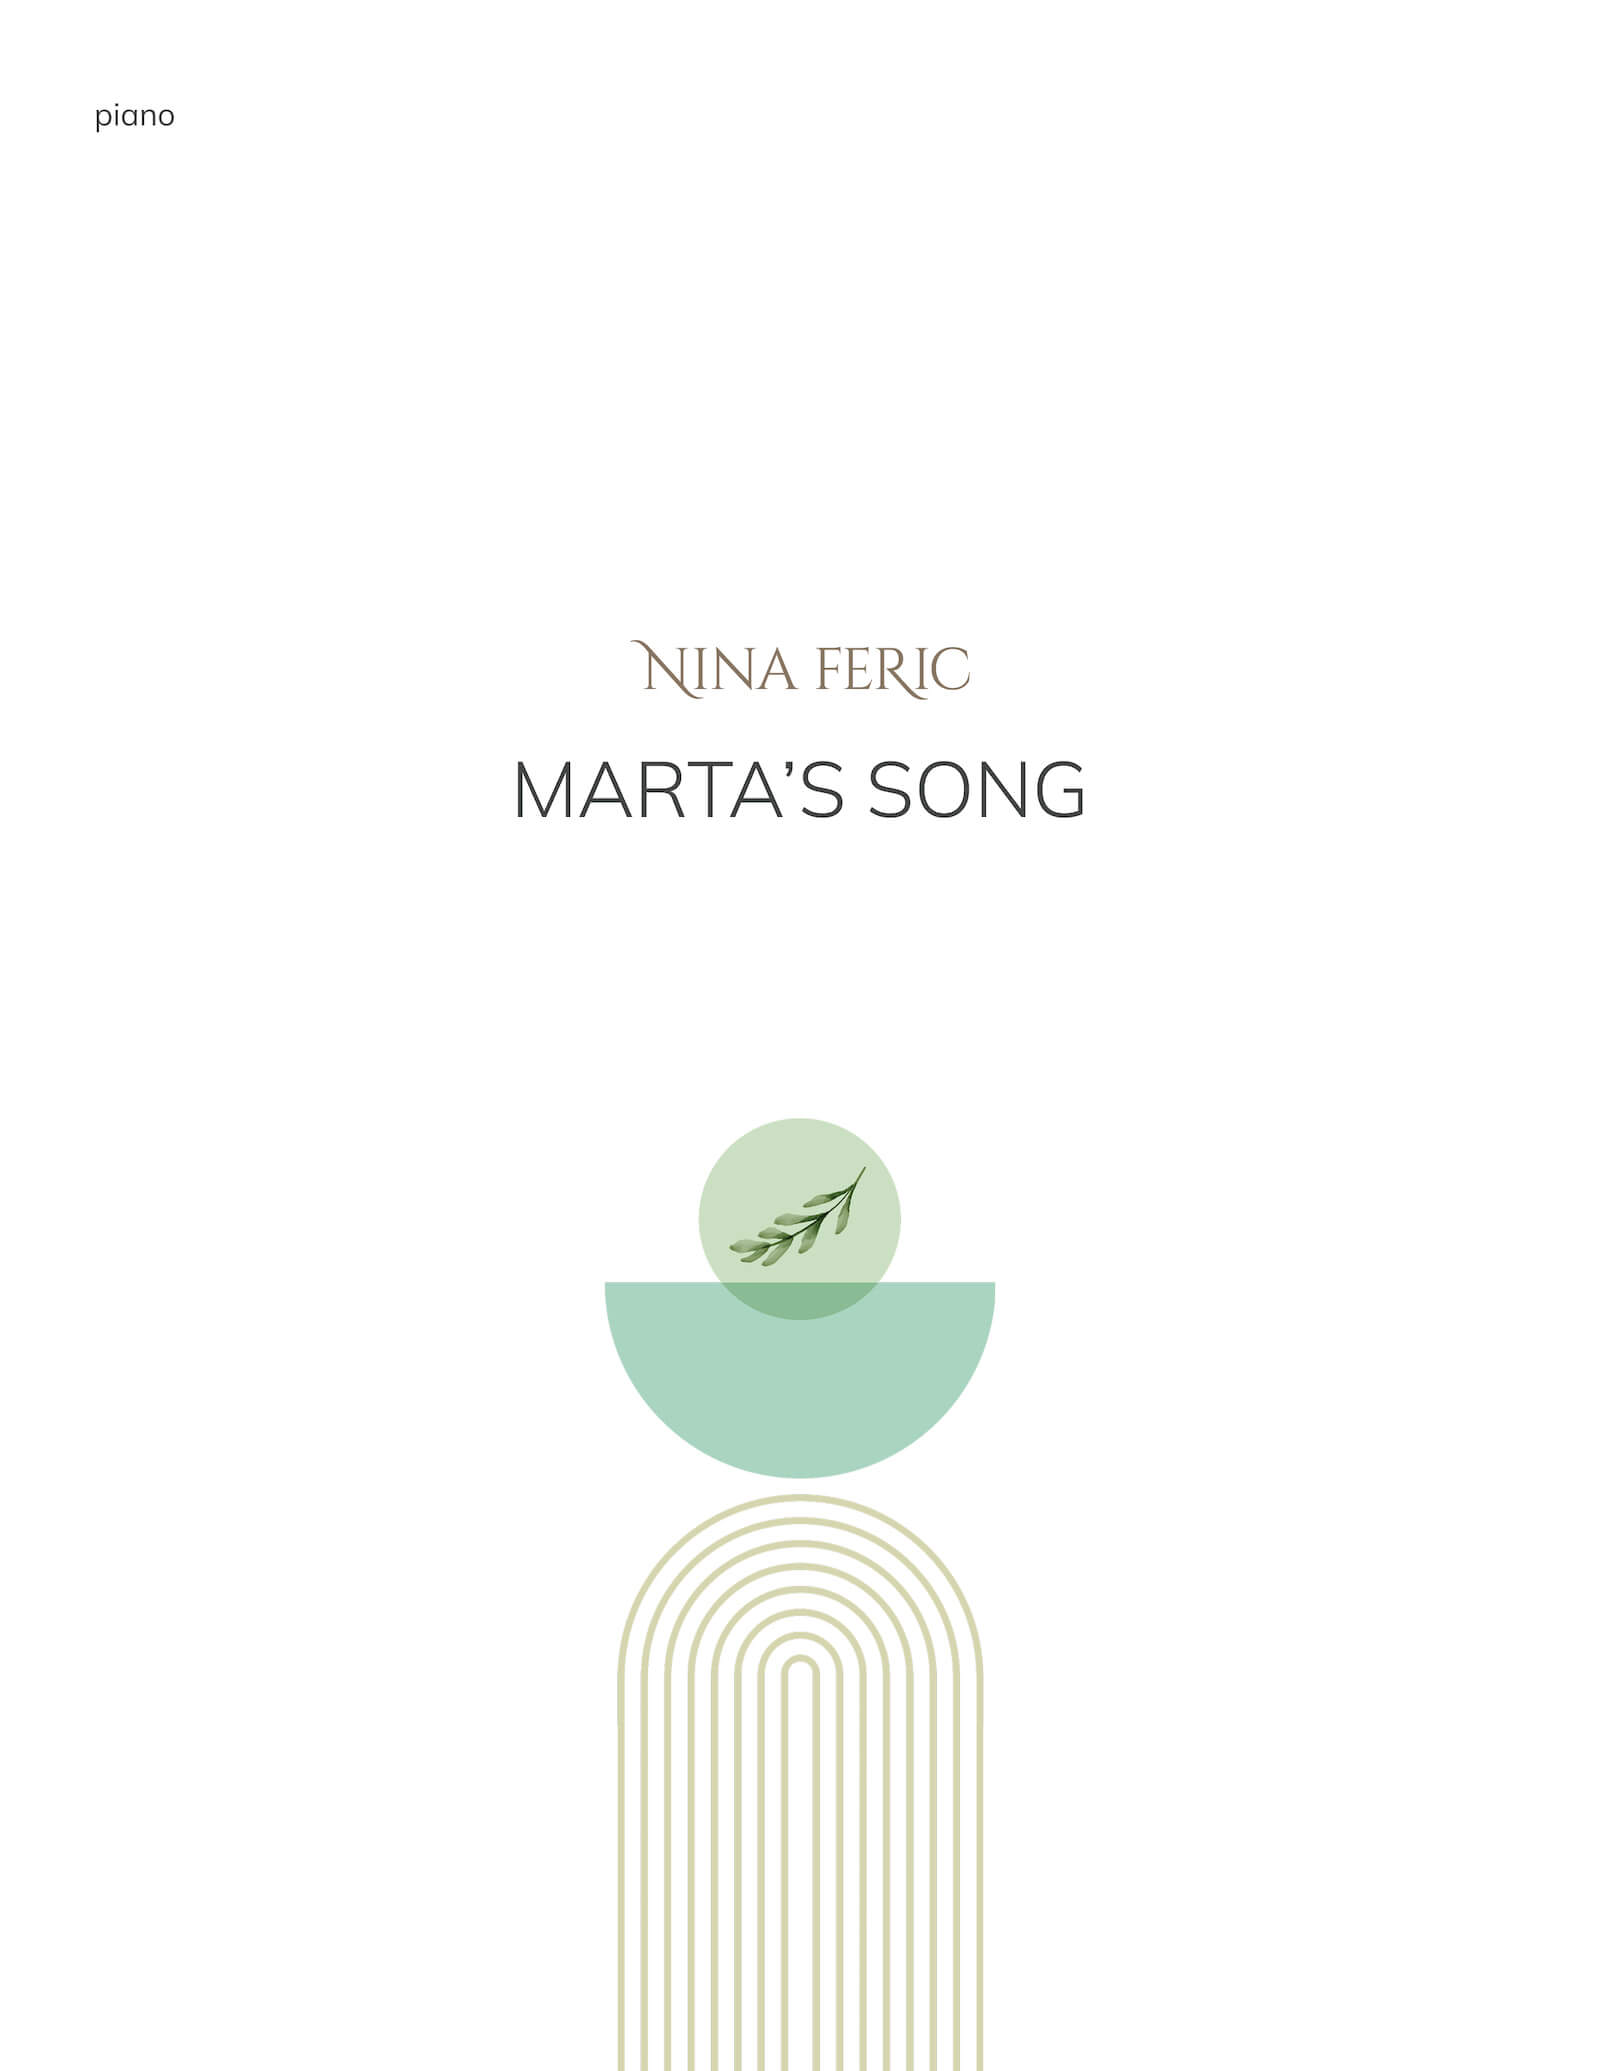 Marta’s Song - score cover